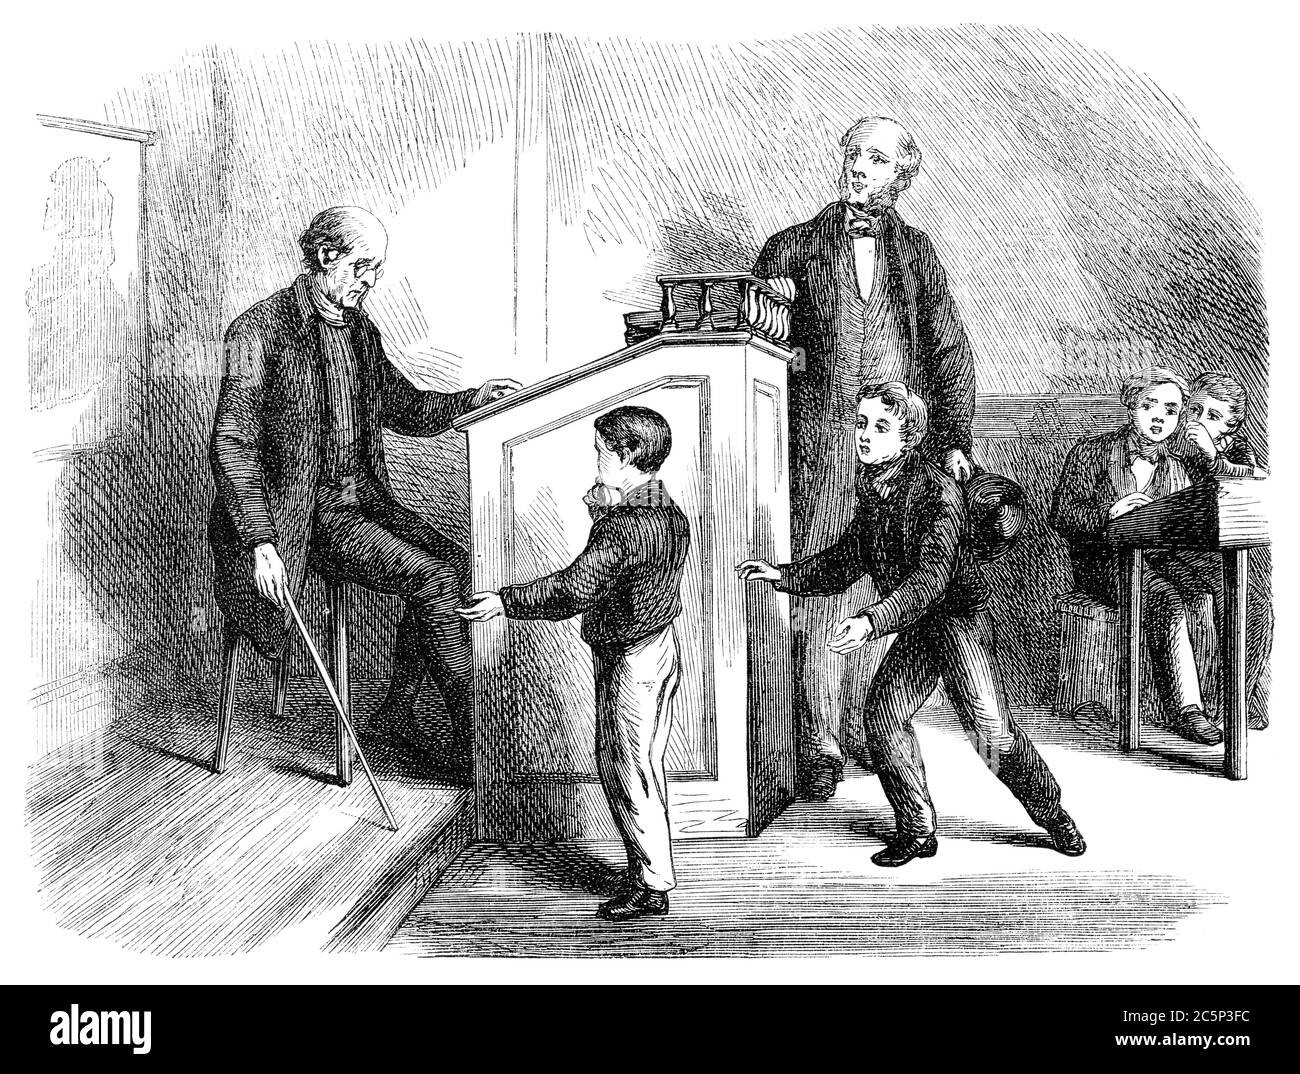 An engraved illustration image of a teacher in a school classroom giving a boy pupil caning punishment discipline from a Victorian book dated 1870 tha Stock Photo